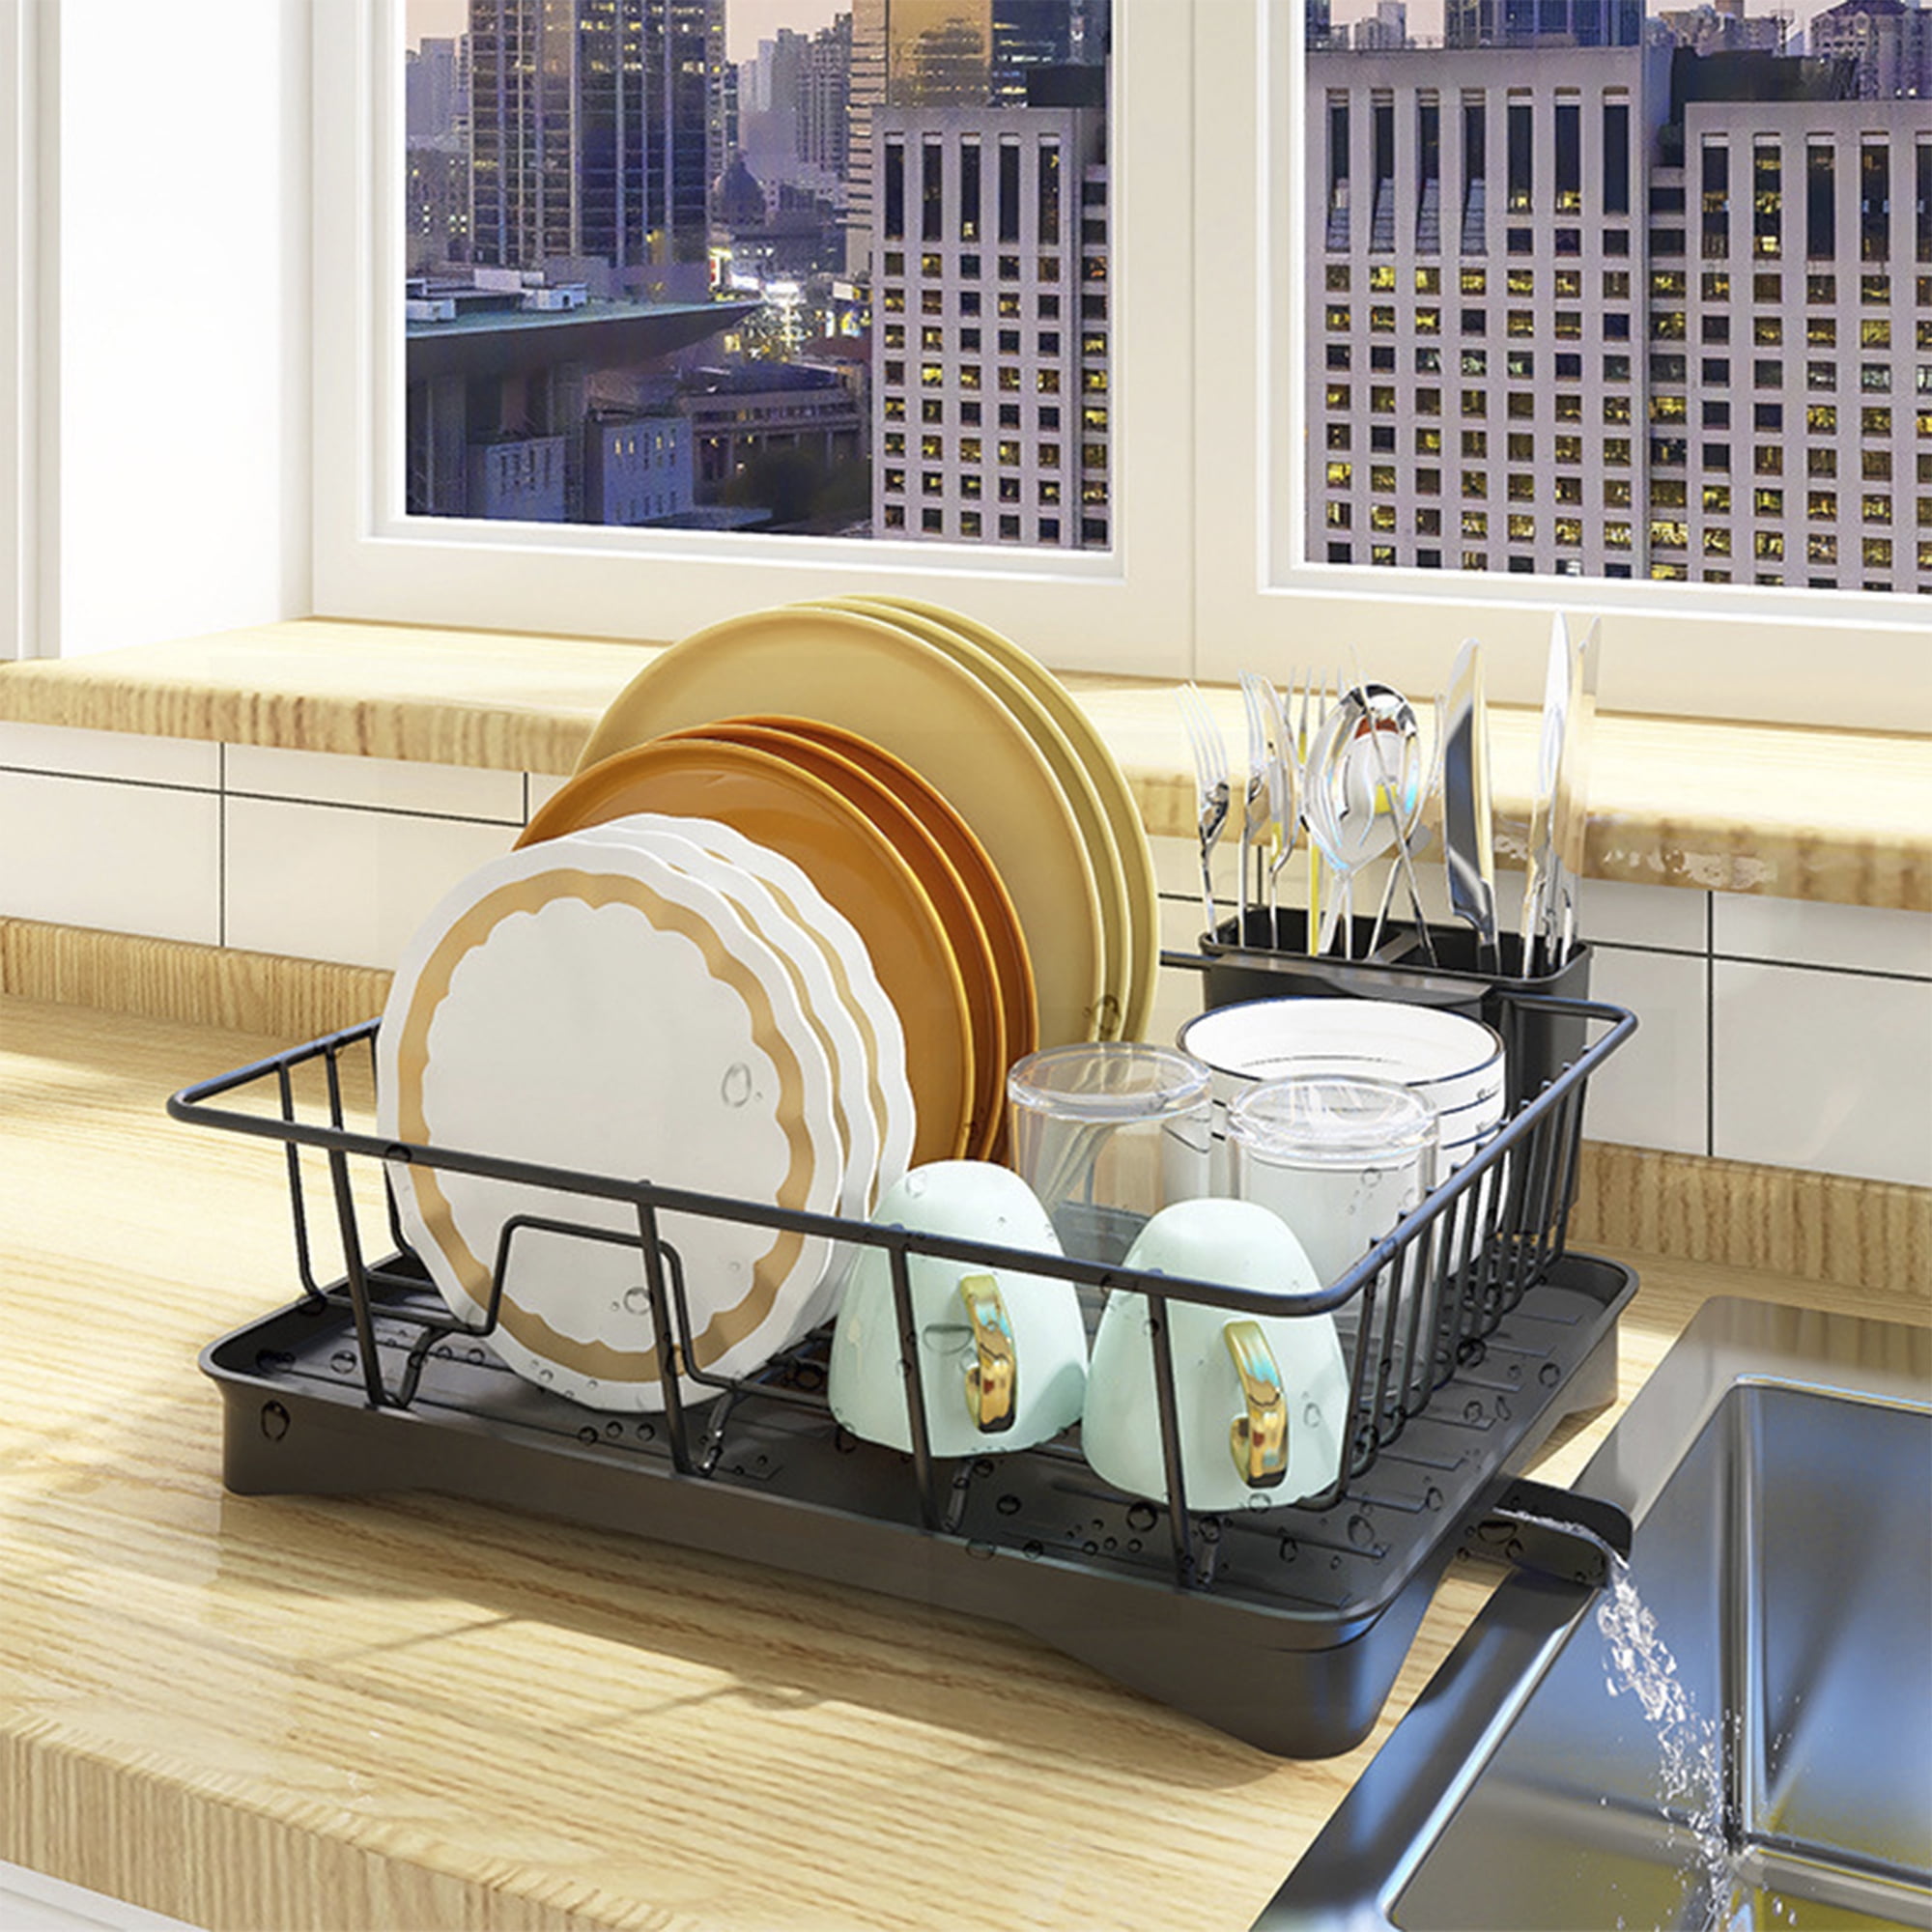 HUFTGOLD Dish Drying Rack, Steel Dish Drainer with Utensil Holder, Kitchen Countertop Organizer with Drying Tray, Black